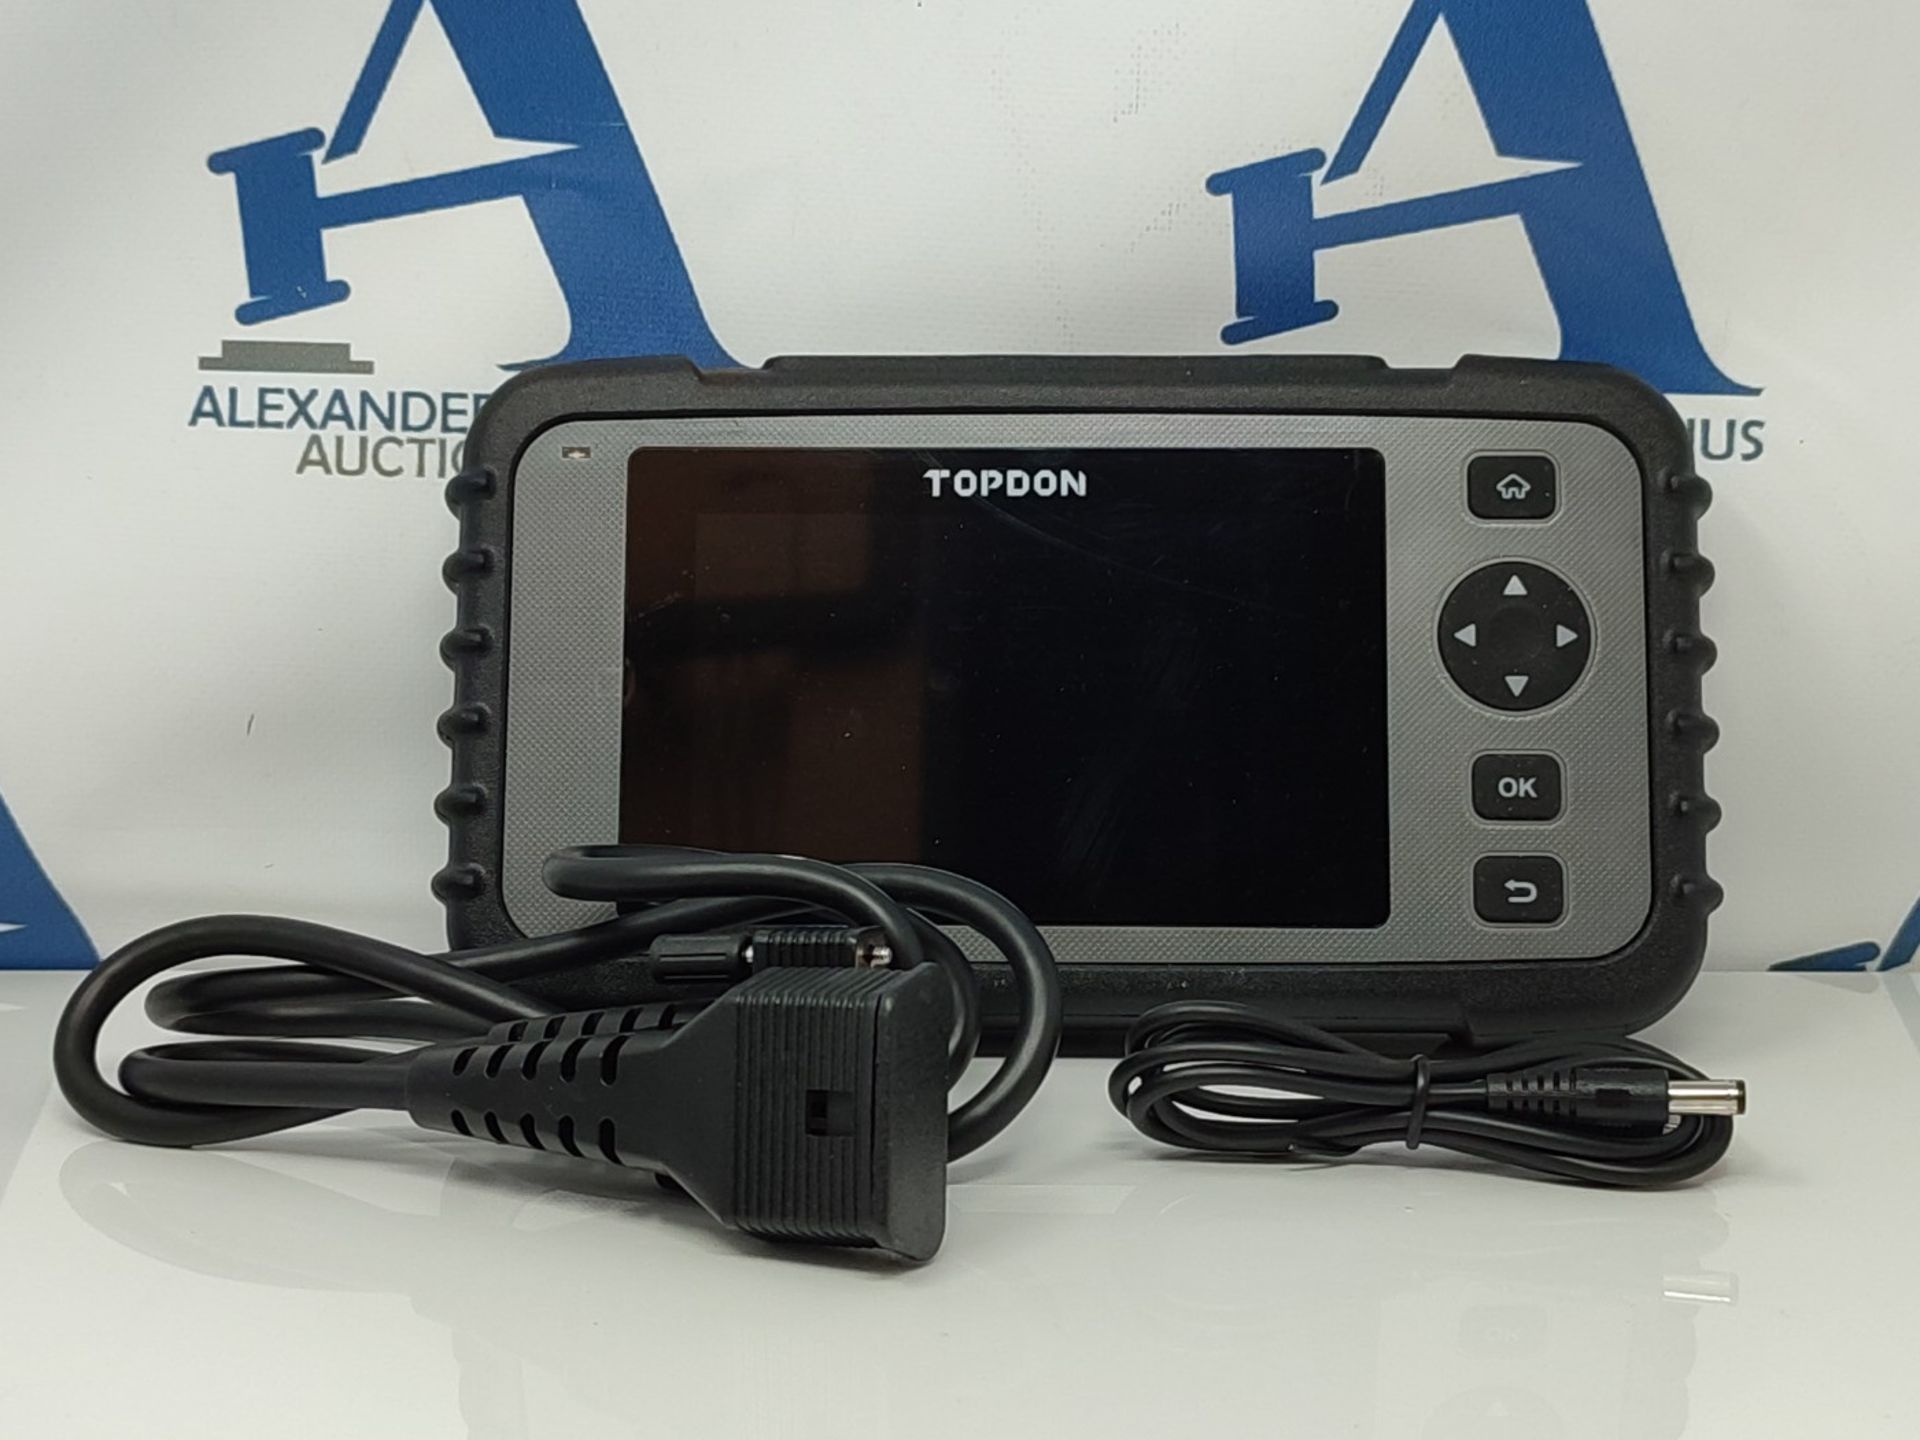 TOPDON AL500 OBD2 Code Reader with Full OBD2 Functions, Universal Car Diagnostic Tool - Image 3 of 3